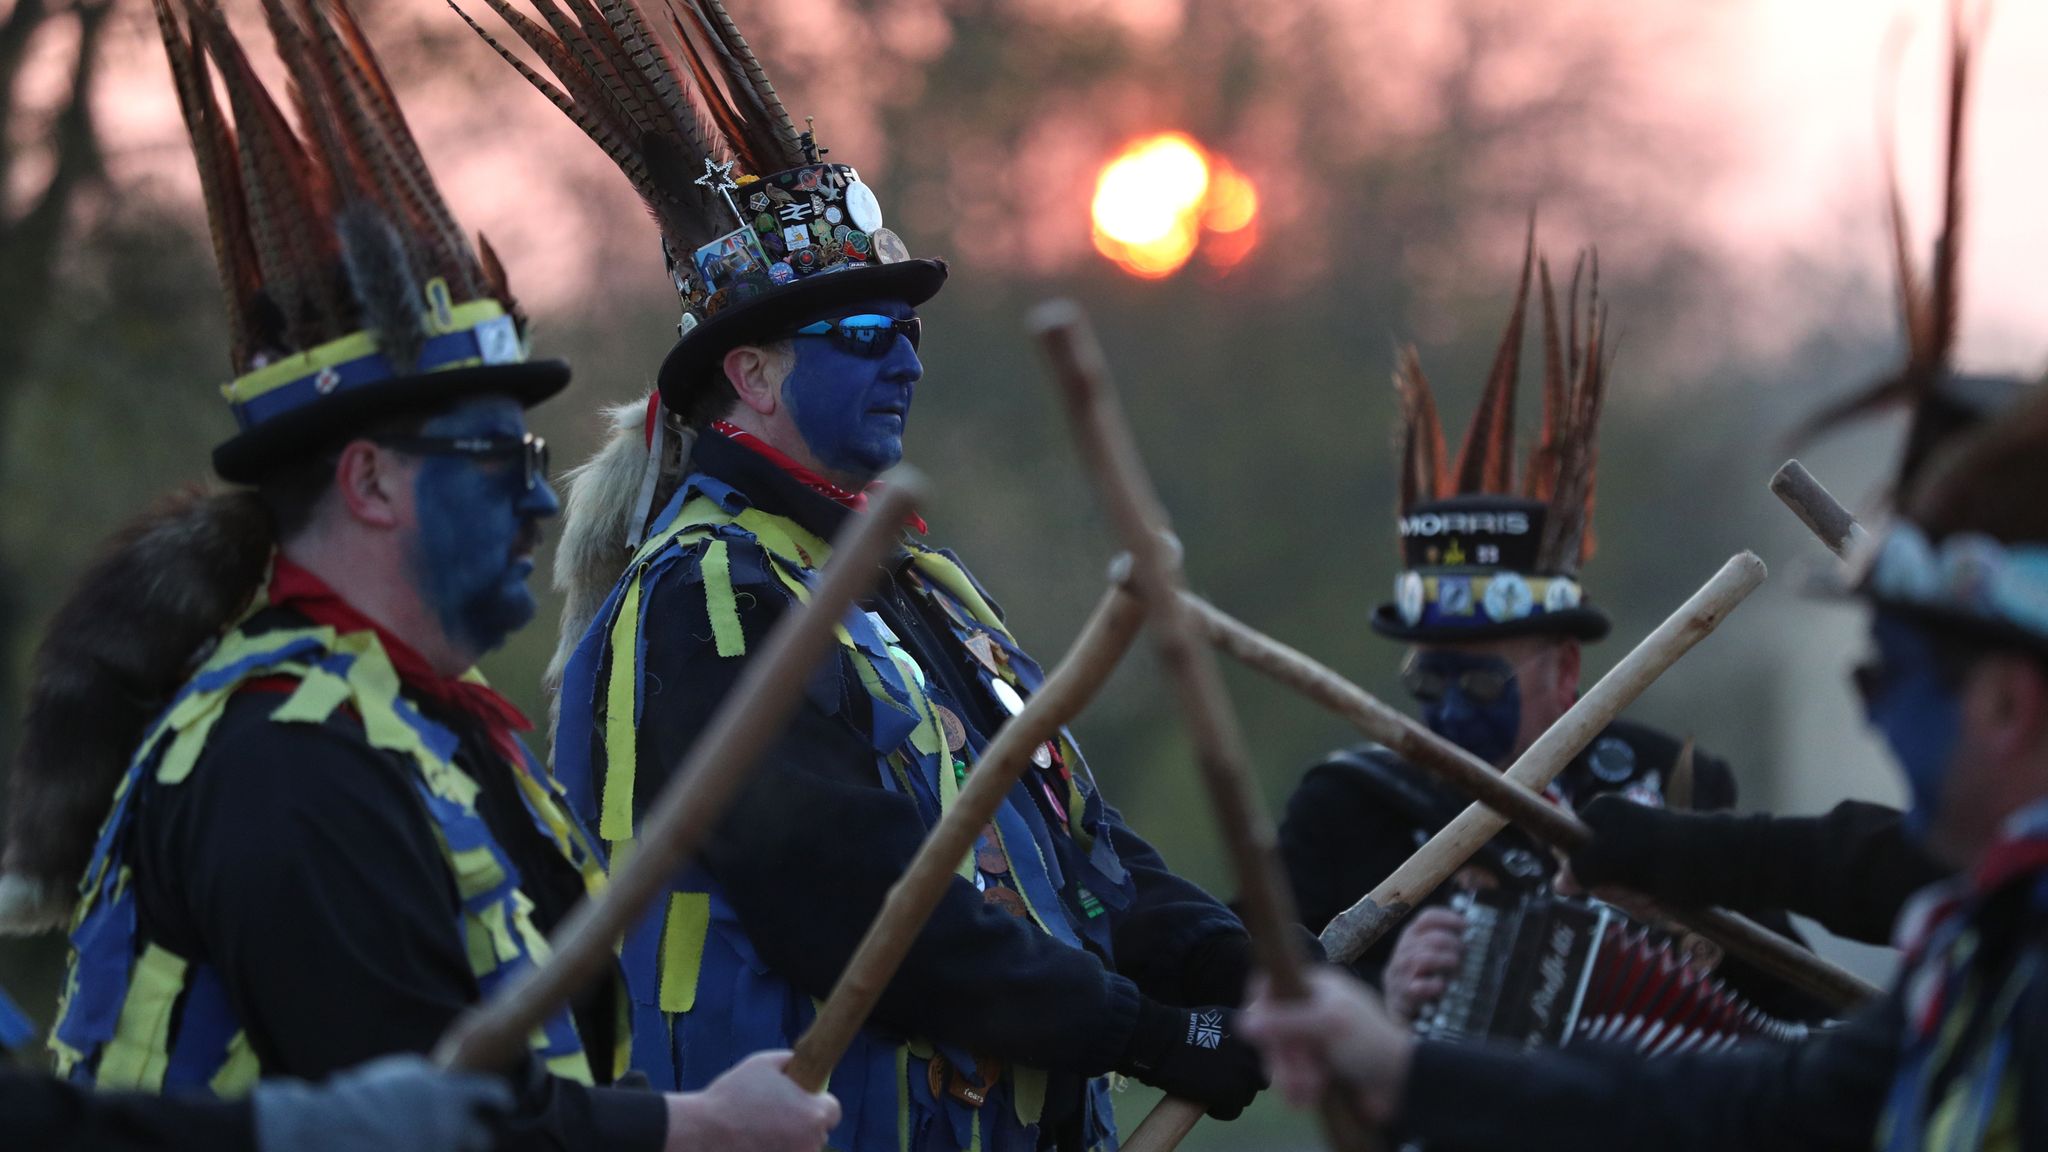 May Day morris dancers swap black face paint for blue over